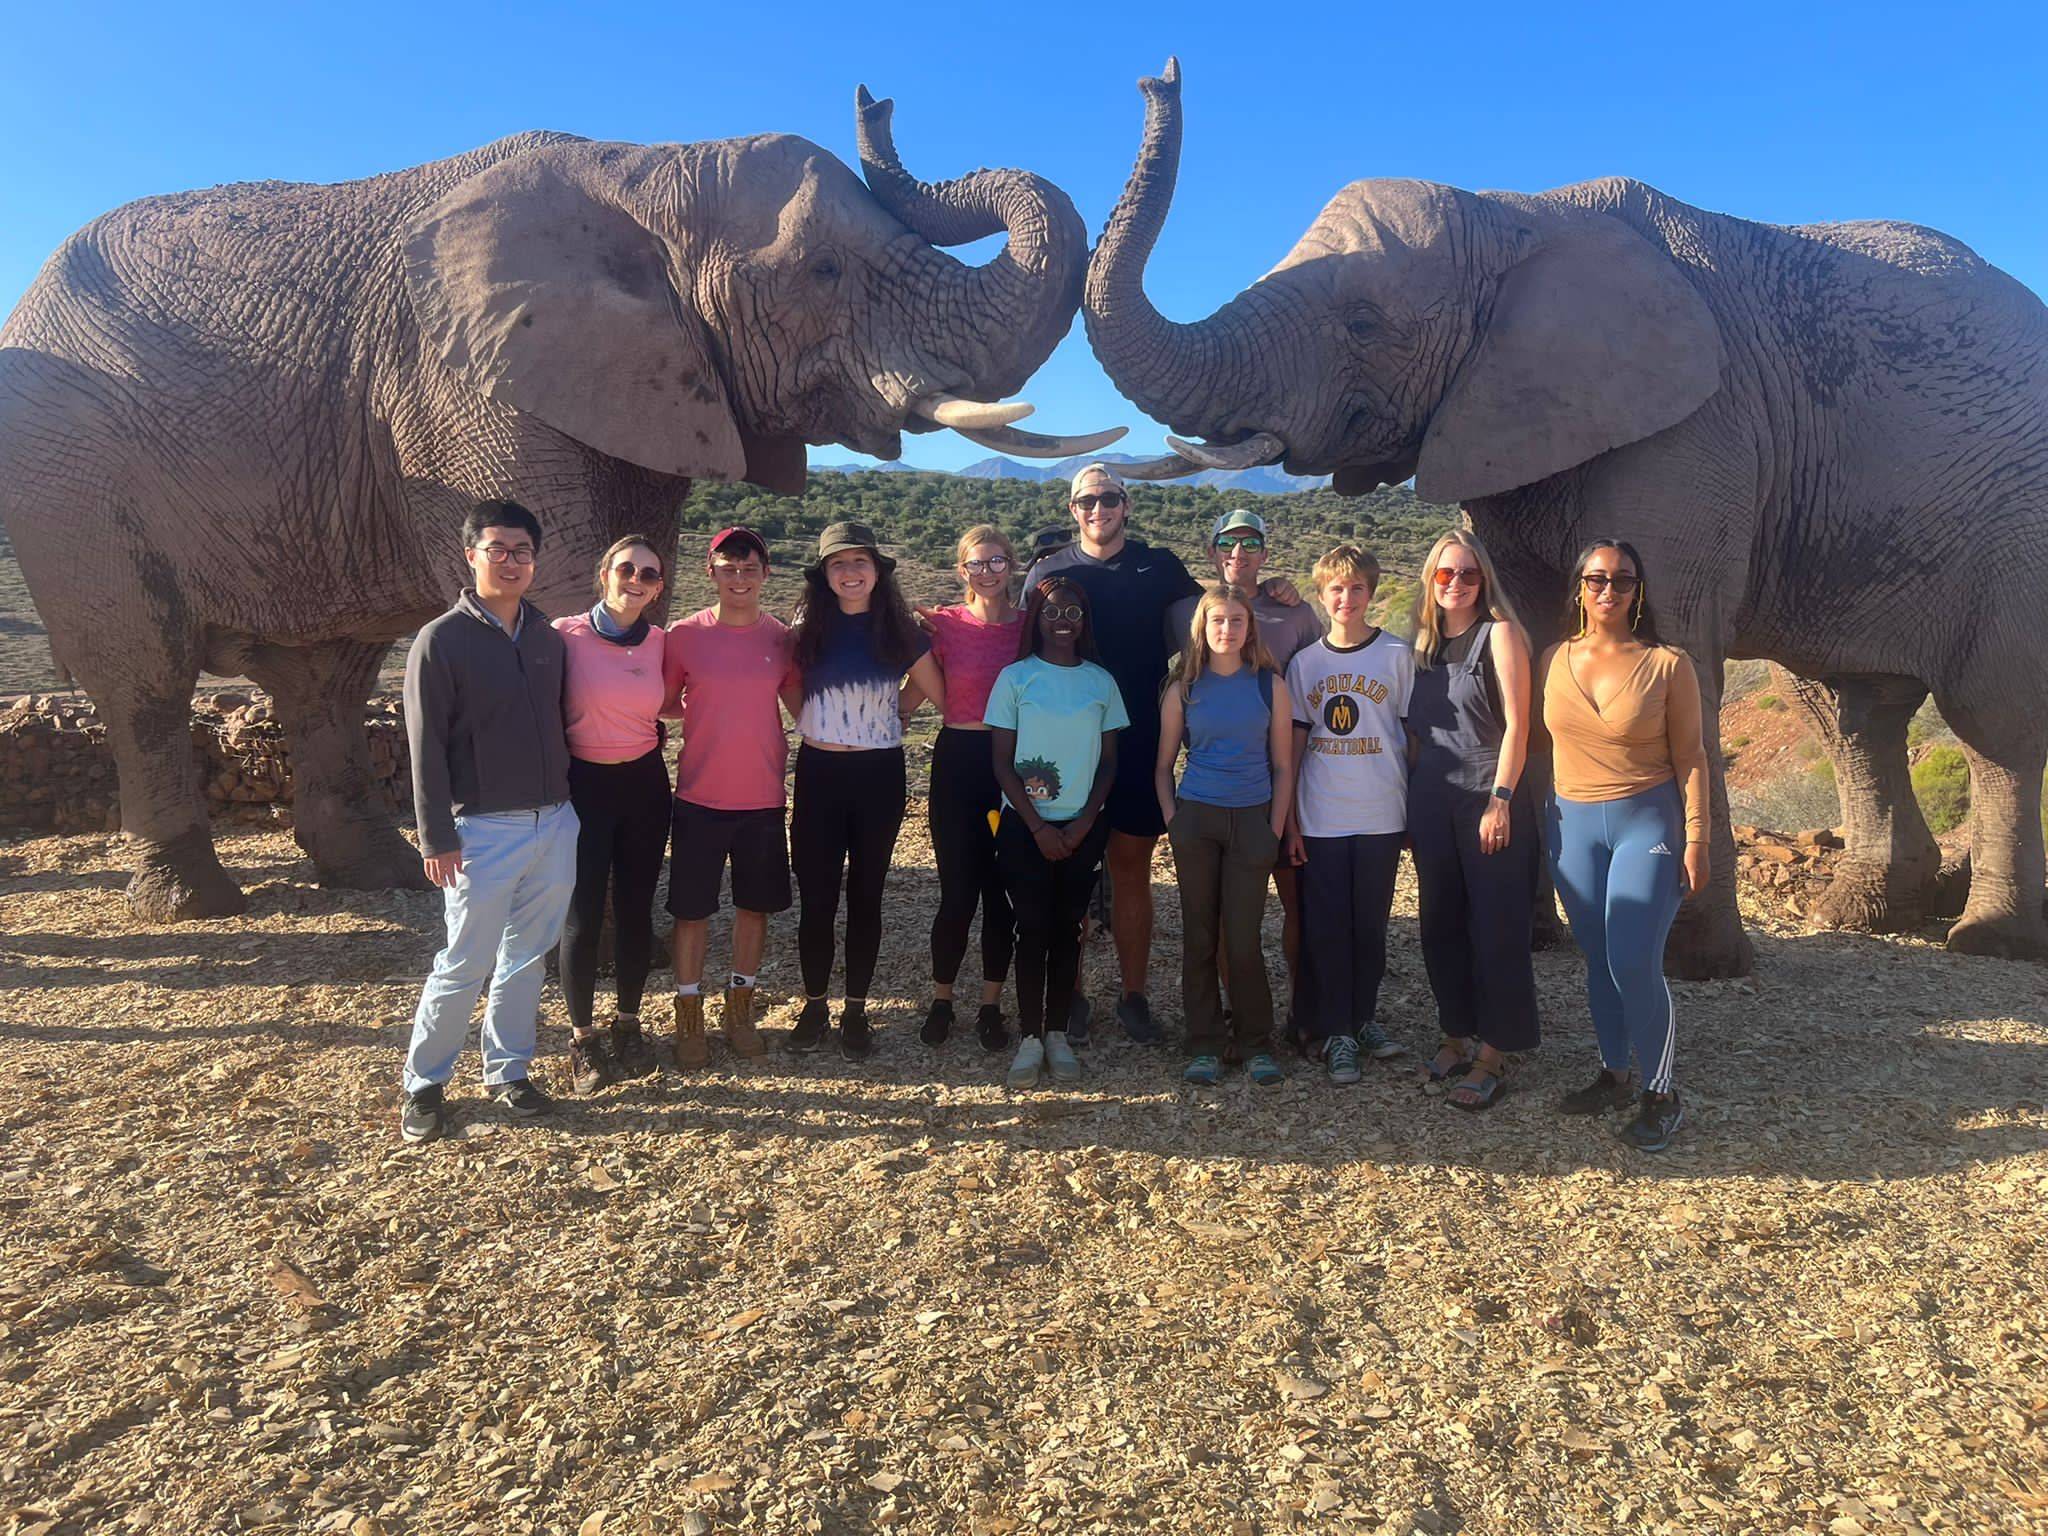 The Fall 2022 South African Study group on spring break at a private wildlife reserve (note: these elephants were orphaned by poachers and then rescued and raised on the reserve, so they can’t be released).